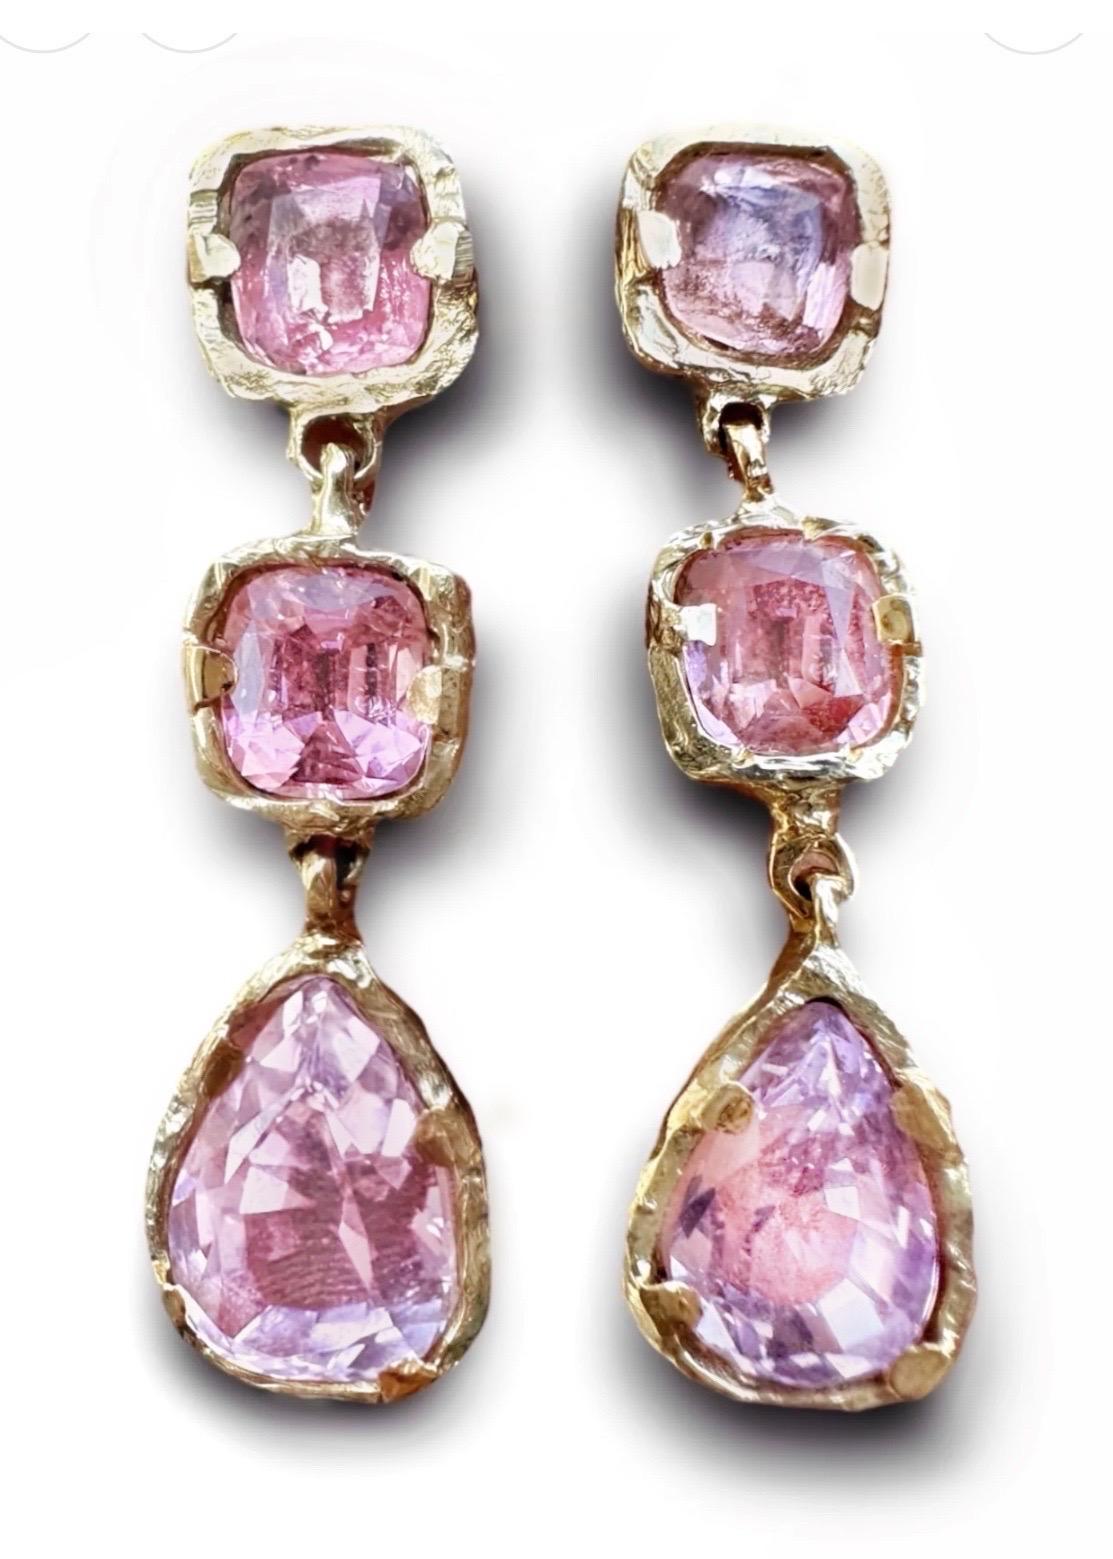 Stunning and glamorous one of a kind handmade earrings that could be your ideal gala, wedding, formal dinner, cocktail party or red carpet companion.

One of a kind 14 ct yellow drop kunzites and pink tourmaline dangle earrings that will give a